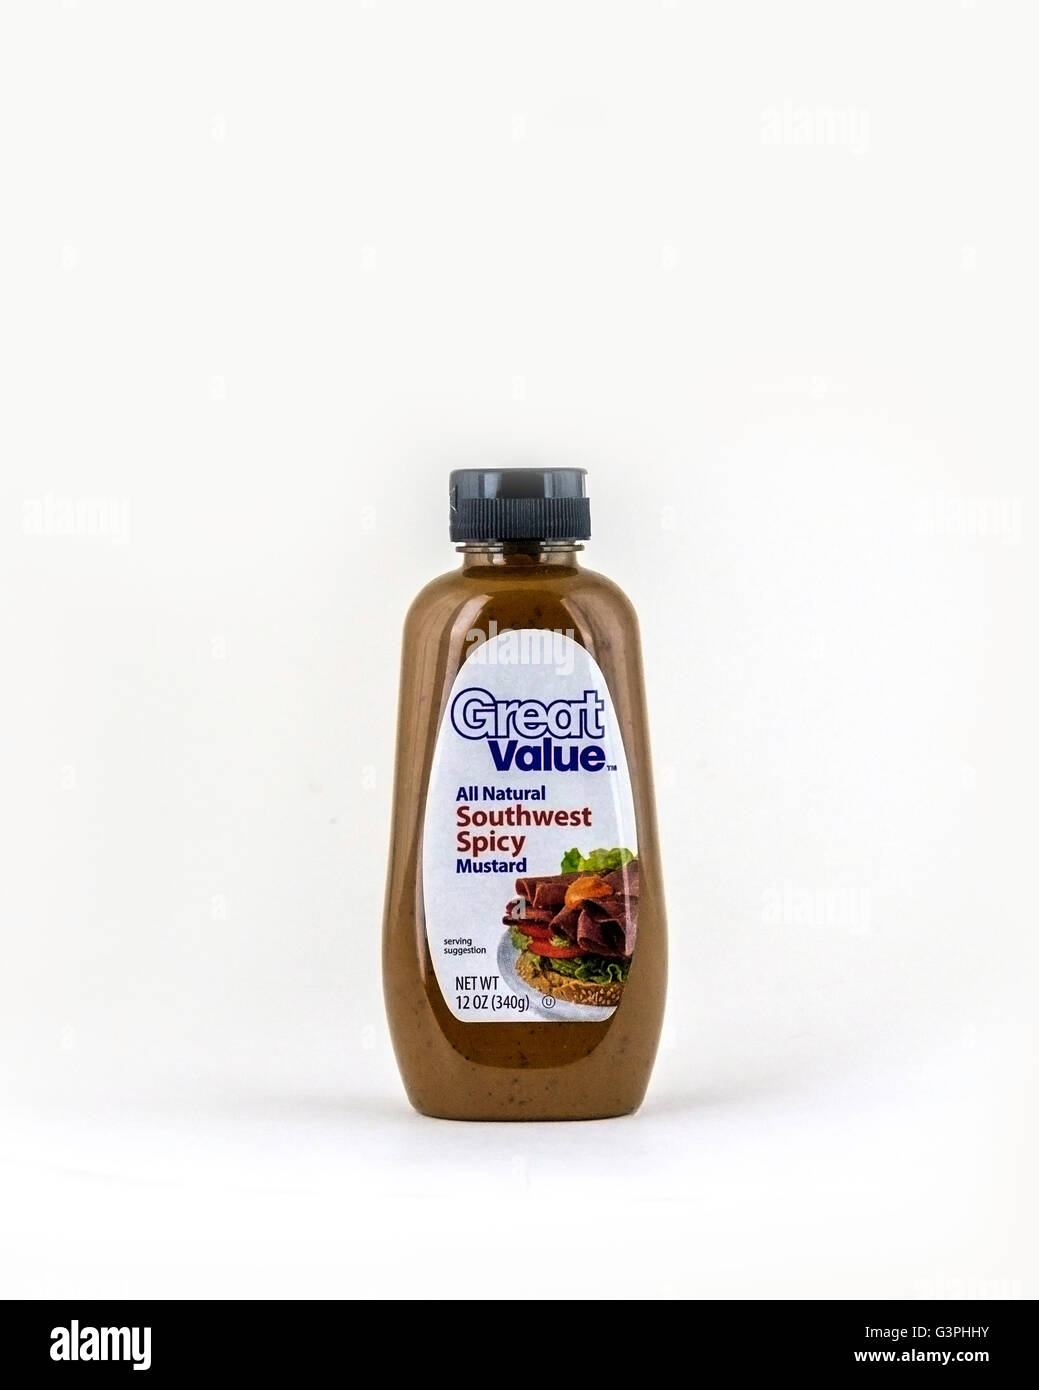 A bottle of Great Value Soutwest Spicy mustard, a Walmart store brand. Cutout. Stock Photo